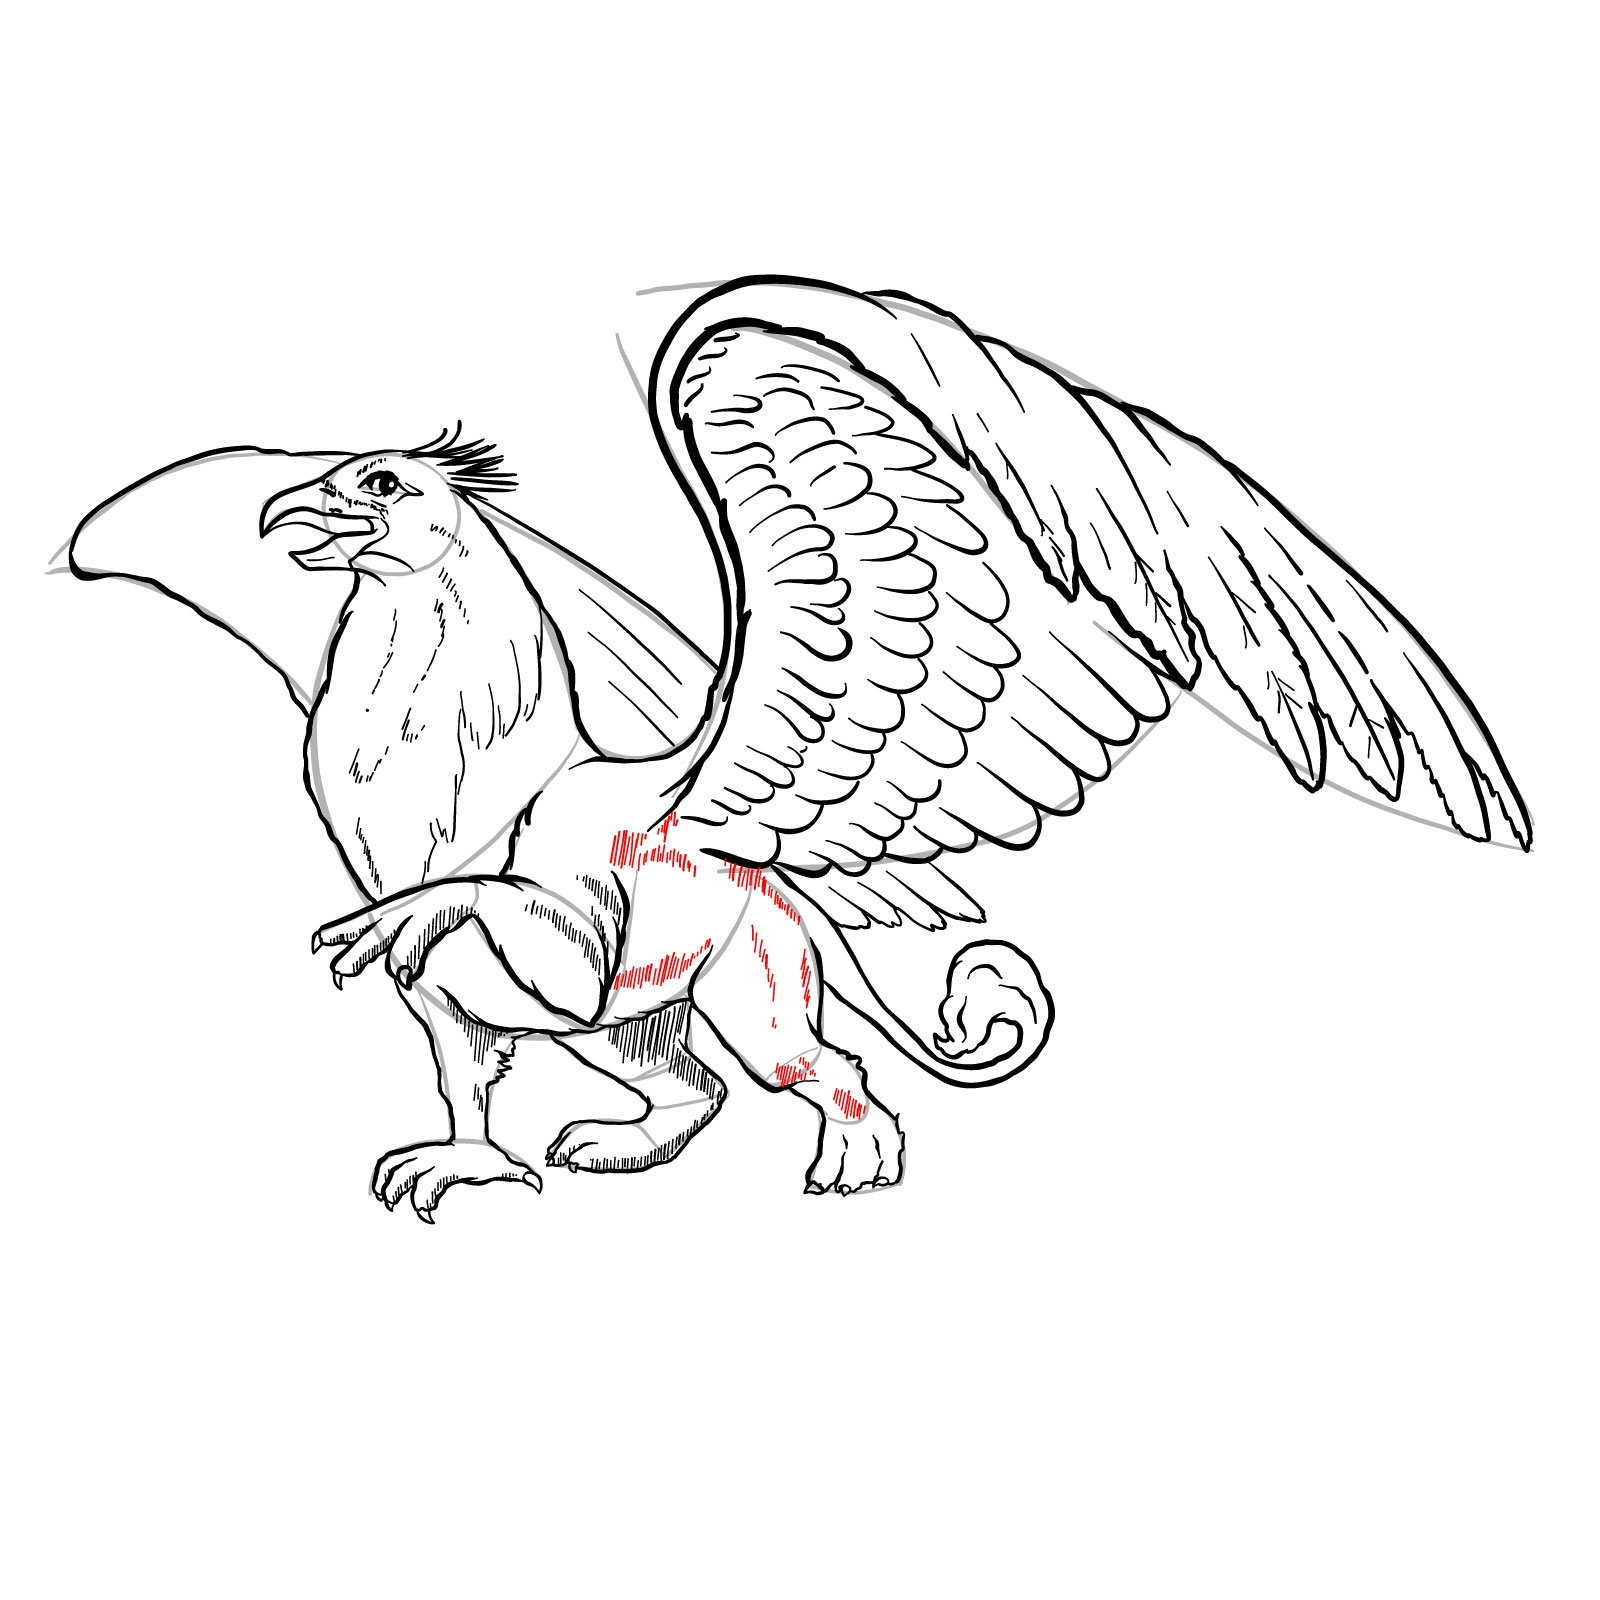 How to draw a Gryphon Sketchok easy drawing guides